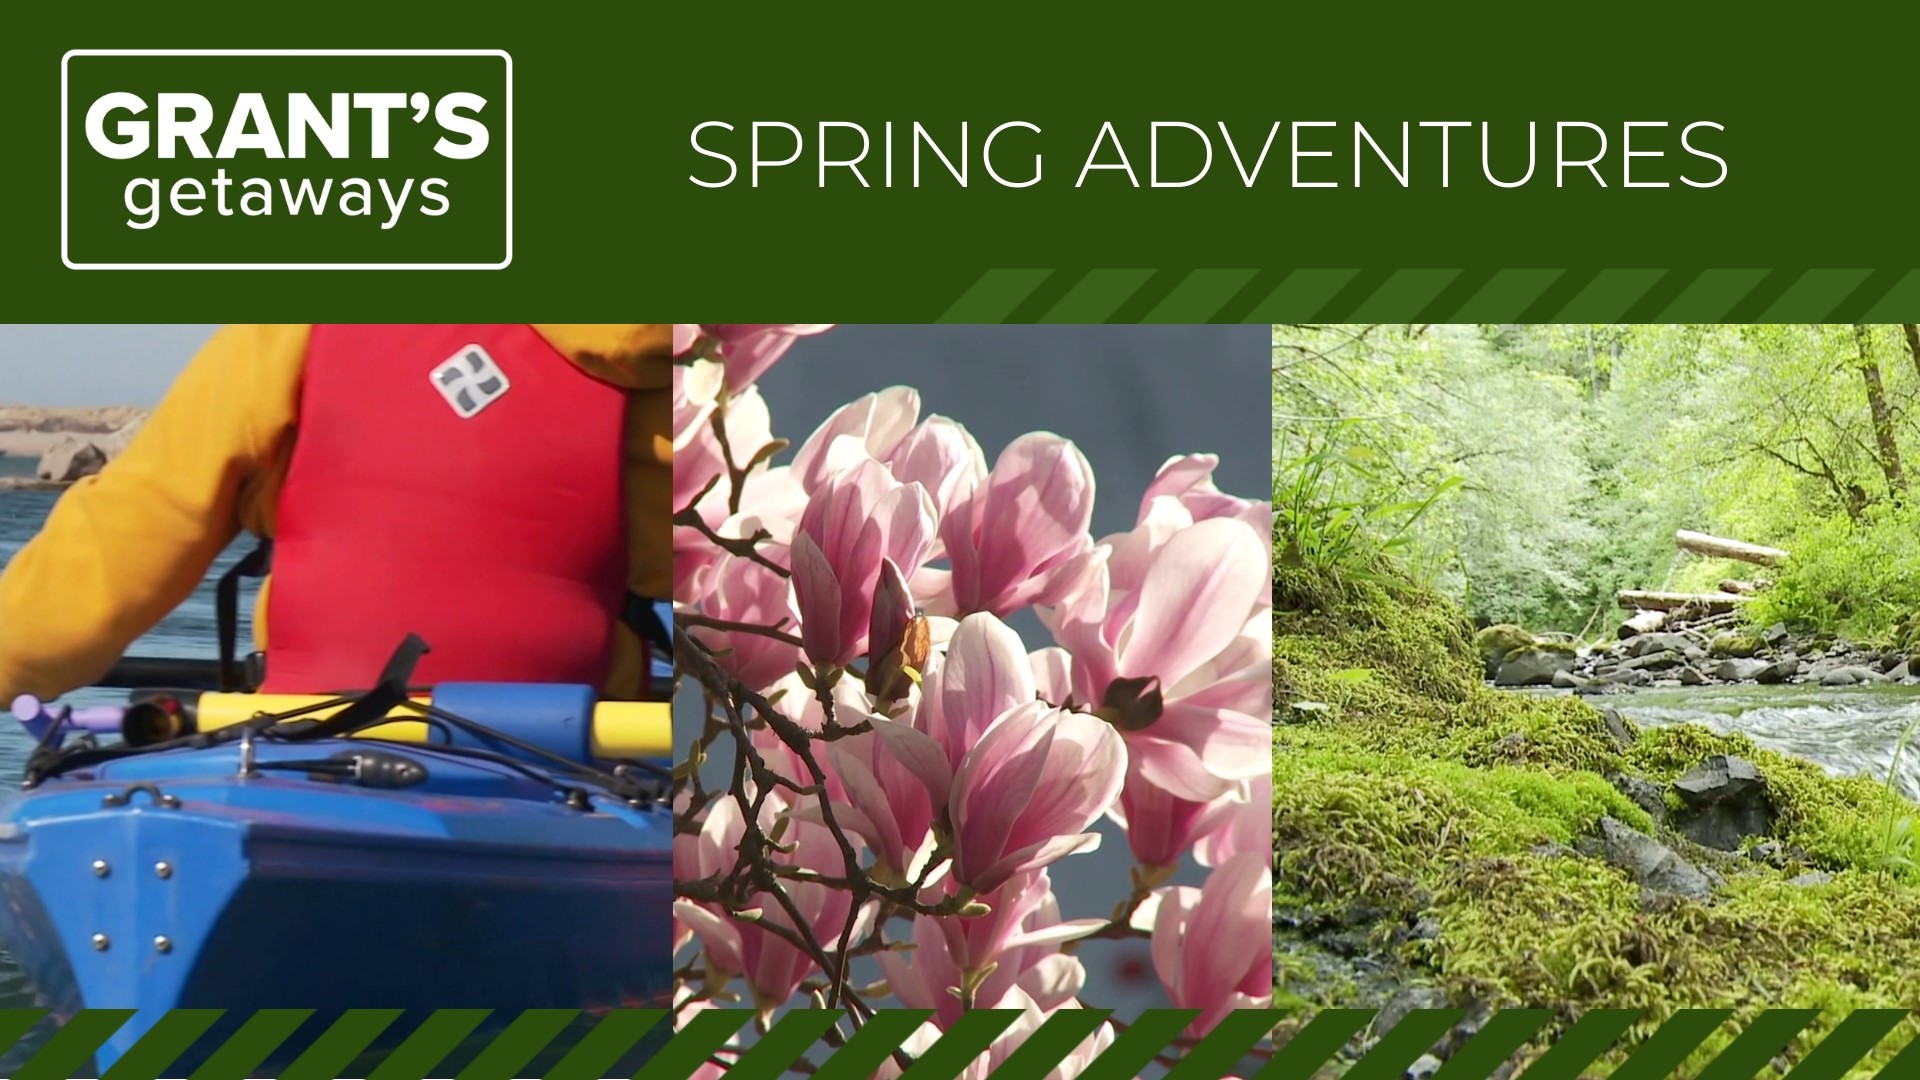 Springtime in Oregon opens up a wide range of getaways, from cherry blossoms and wildflowers to waterfalls and kayaking voyages.